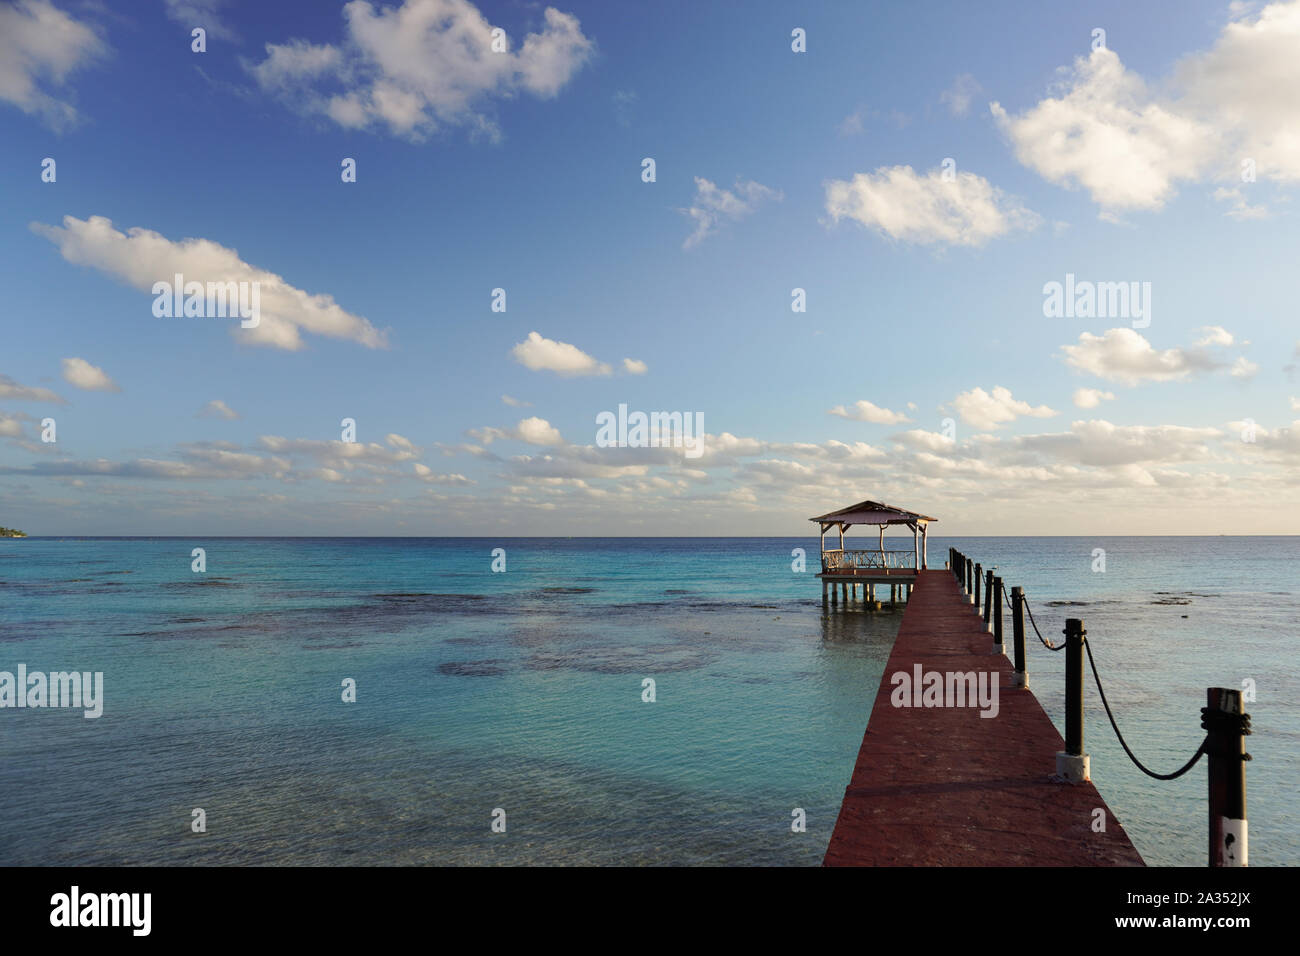 A pier leads out into a tropical lagoon under a bright blue sky on the island of Fakarava in French Polynesia Stock Photo